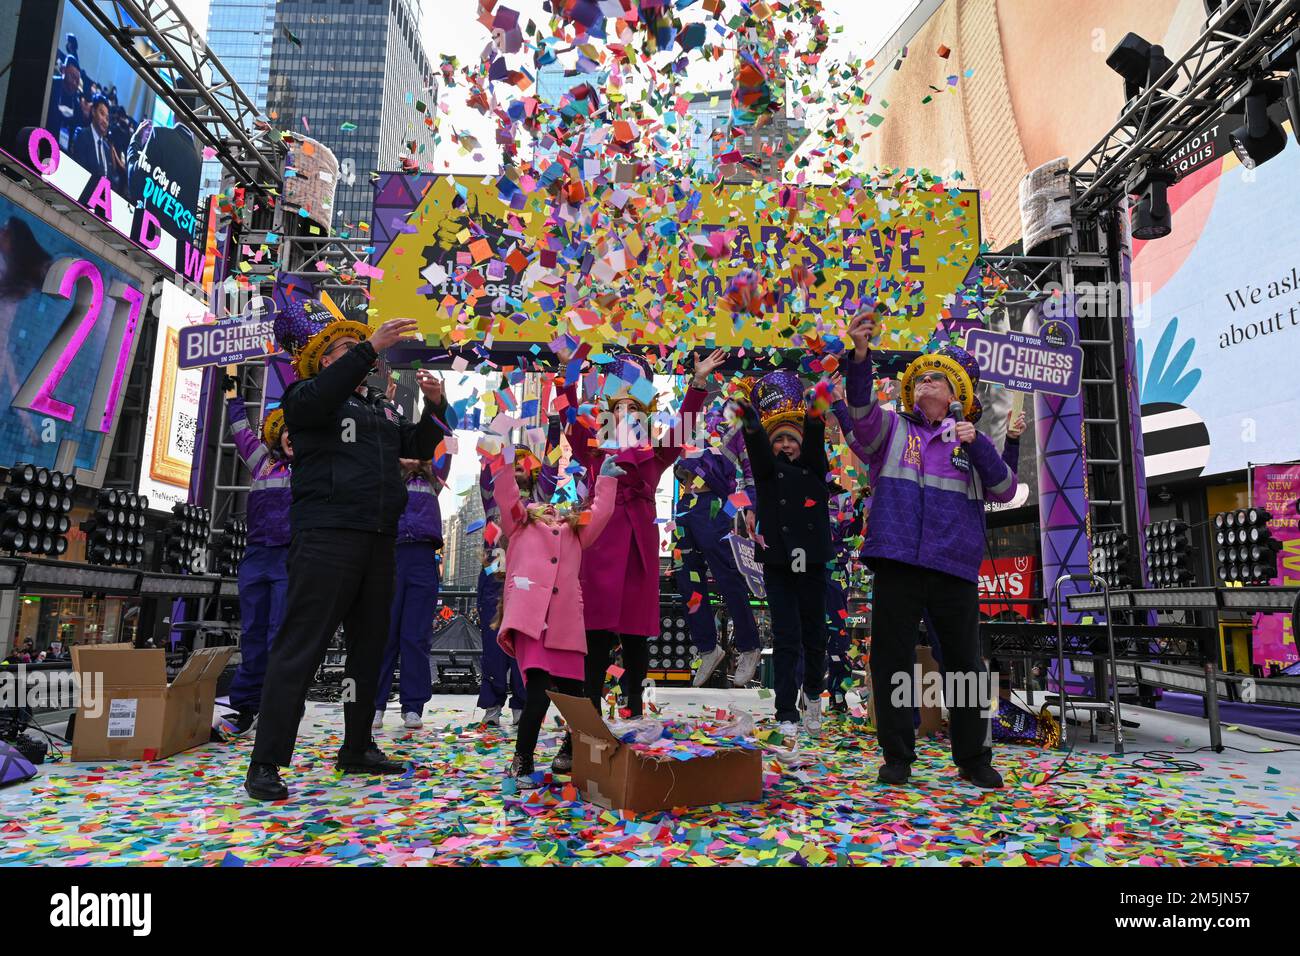 Organizers test confetti drop ahead of New Year's Eve in Times Square